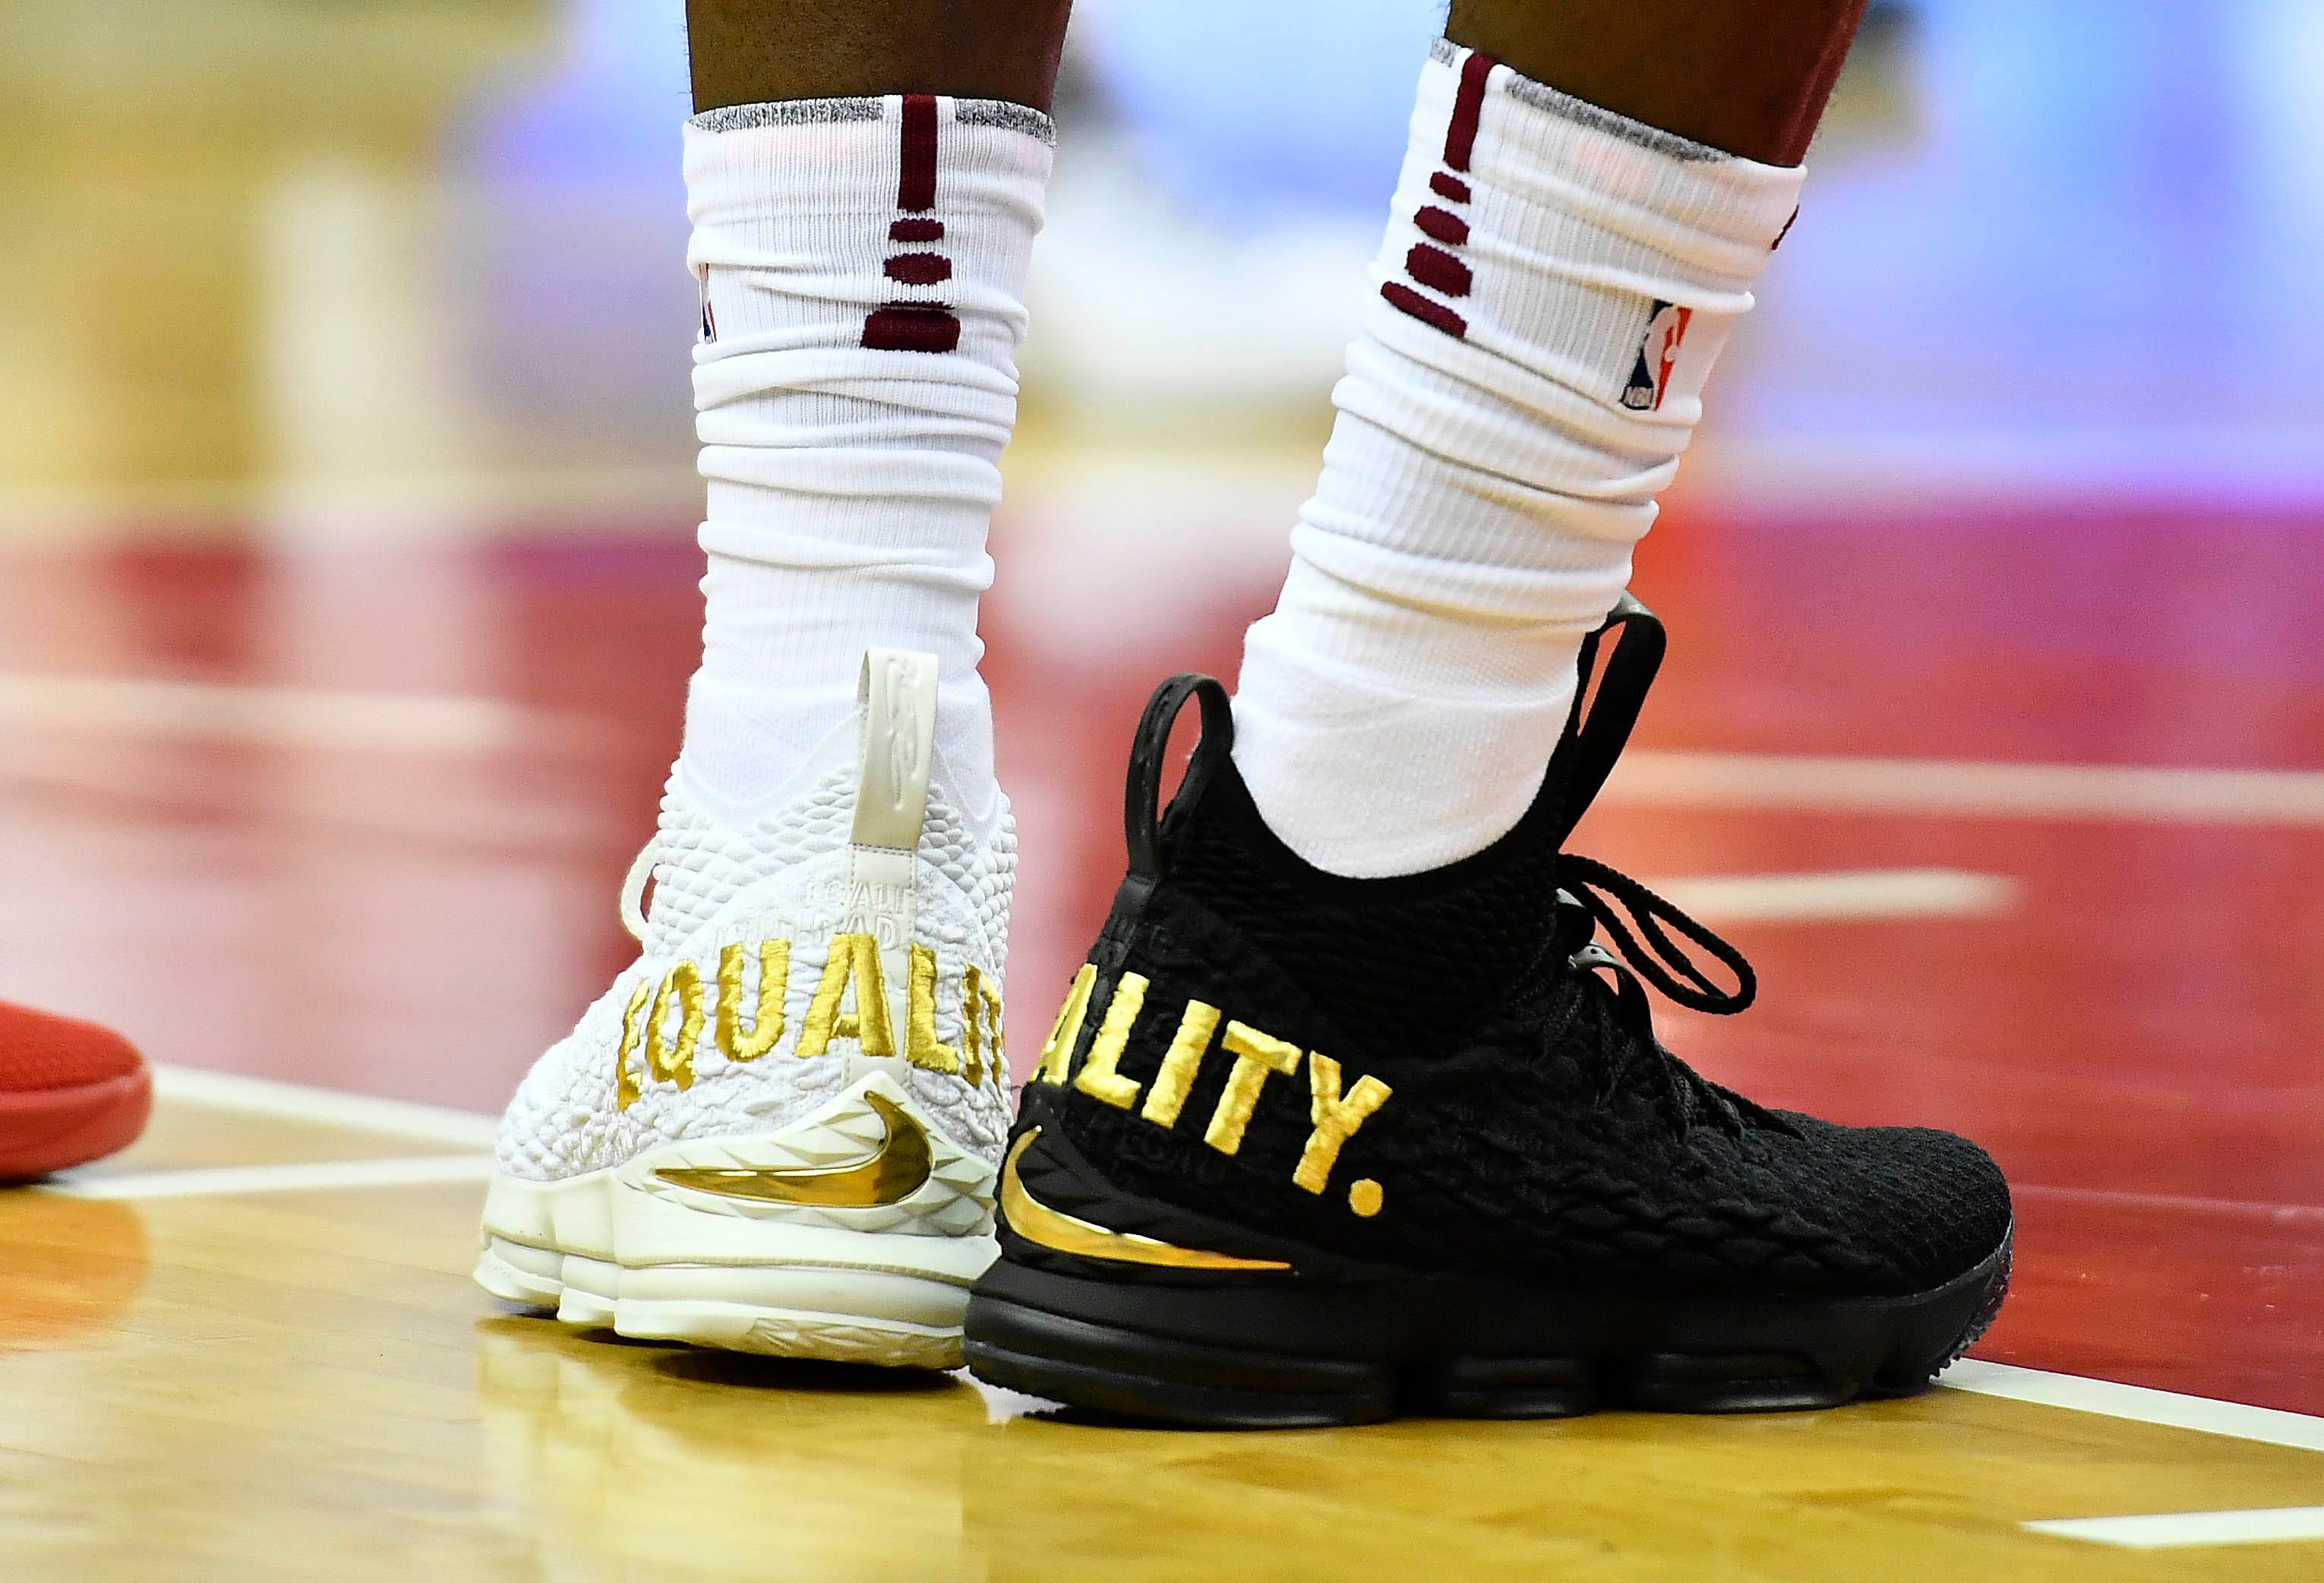 lebron shoes today's game